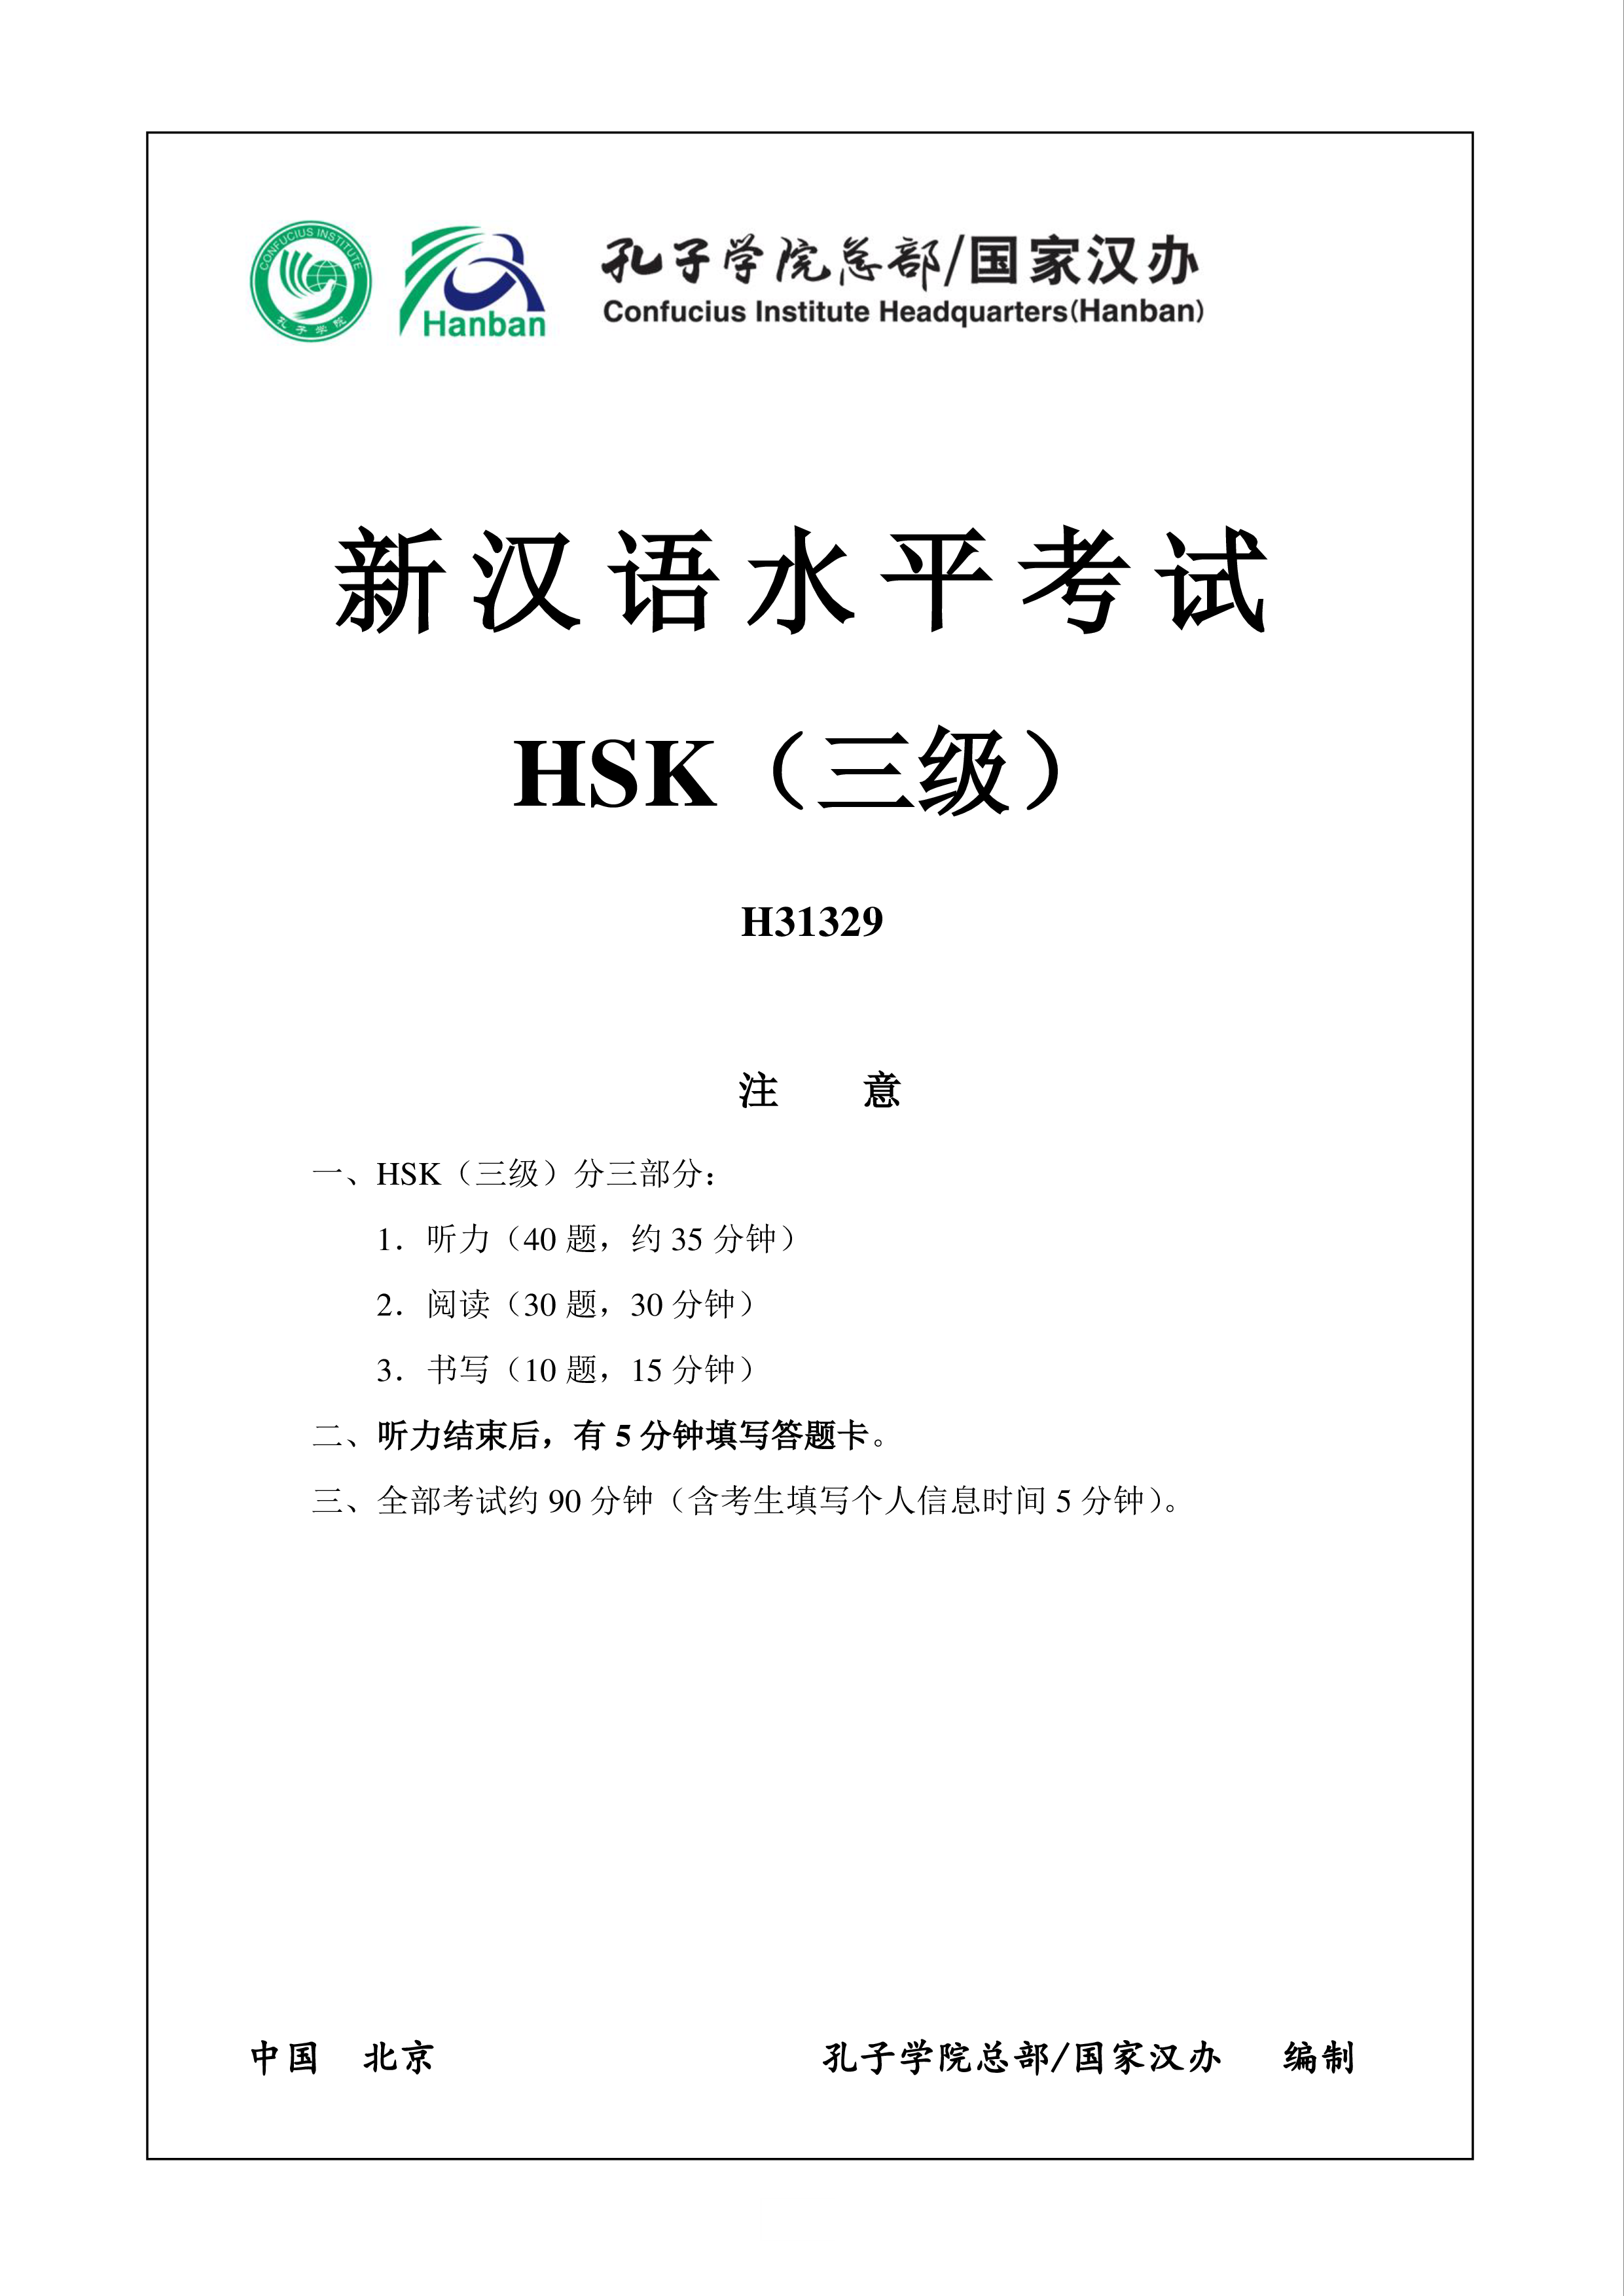 HSK3 Chinese Exam including Answers # H31329 模板